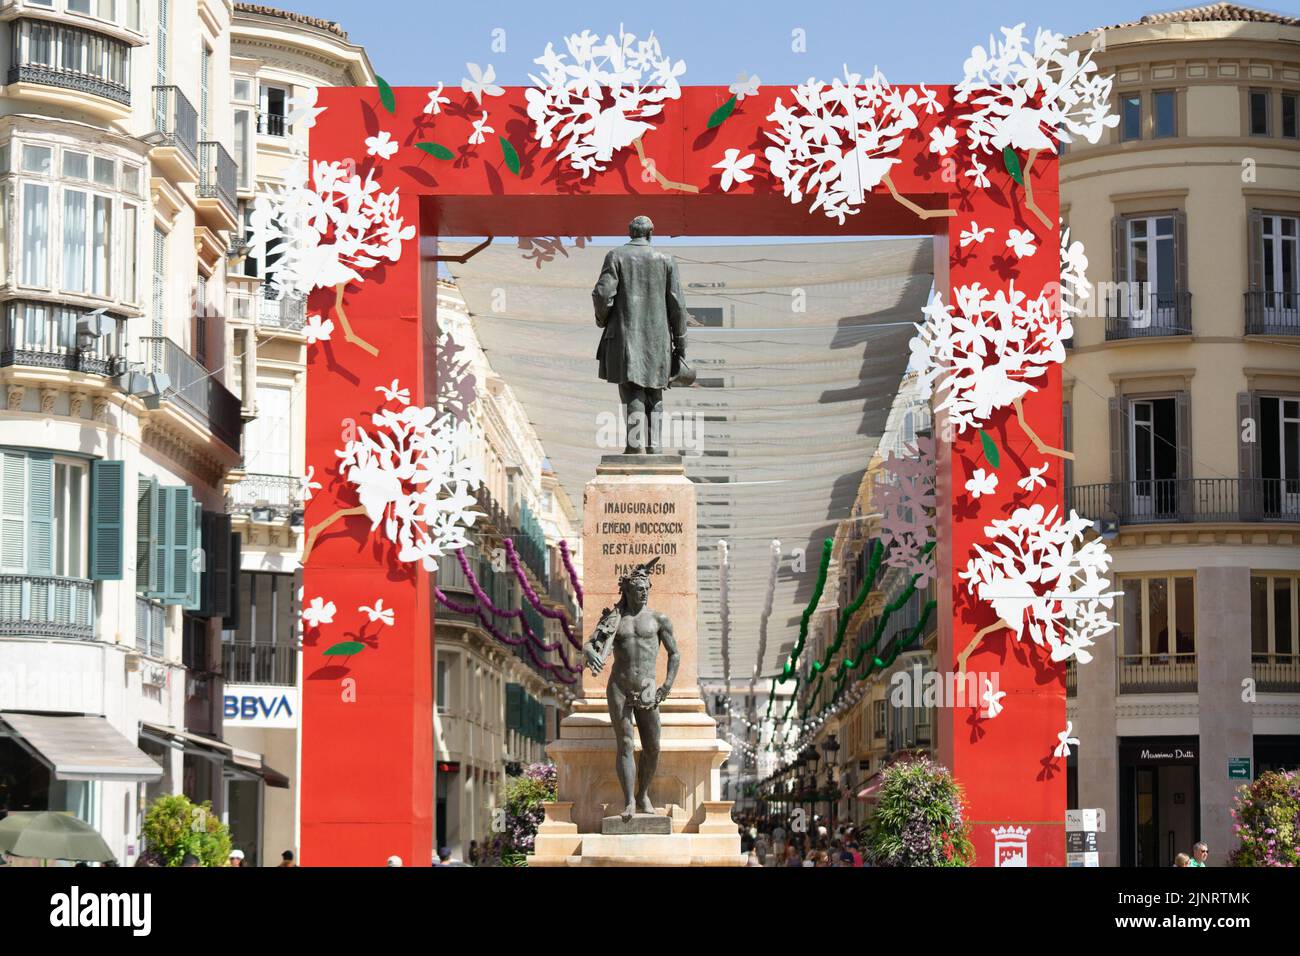 Panoramic view of the Malaga's Fair 2022 decoration installed at Marques de Larios Street in Malaga. The Fair is being held for the first time since 2019. The 2020 and 2021 editions were suspended due to Covid19 pandemic. Stock Photo